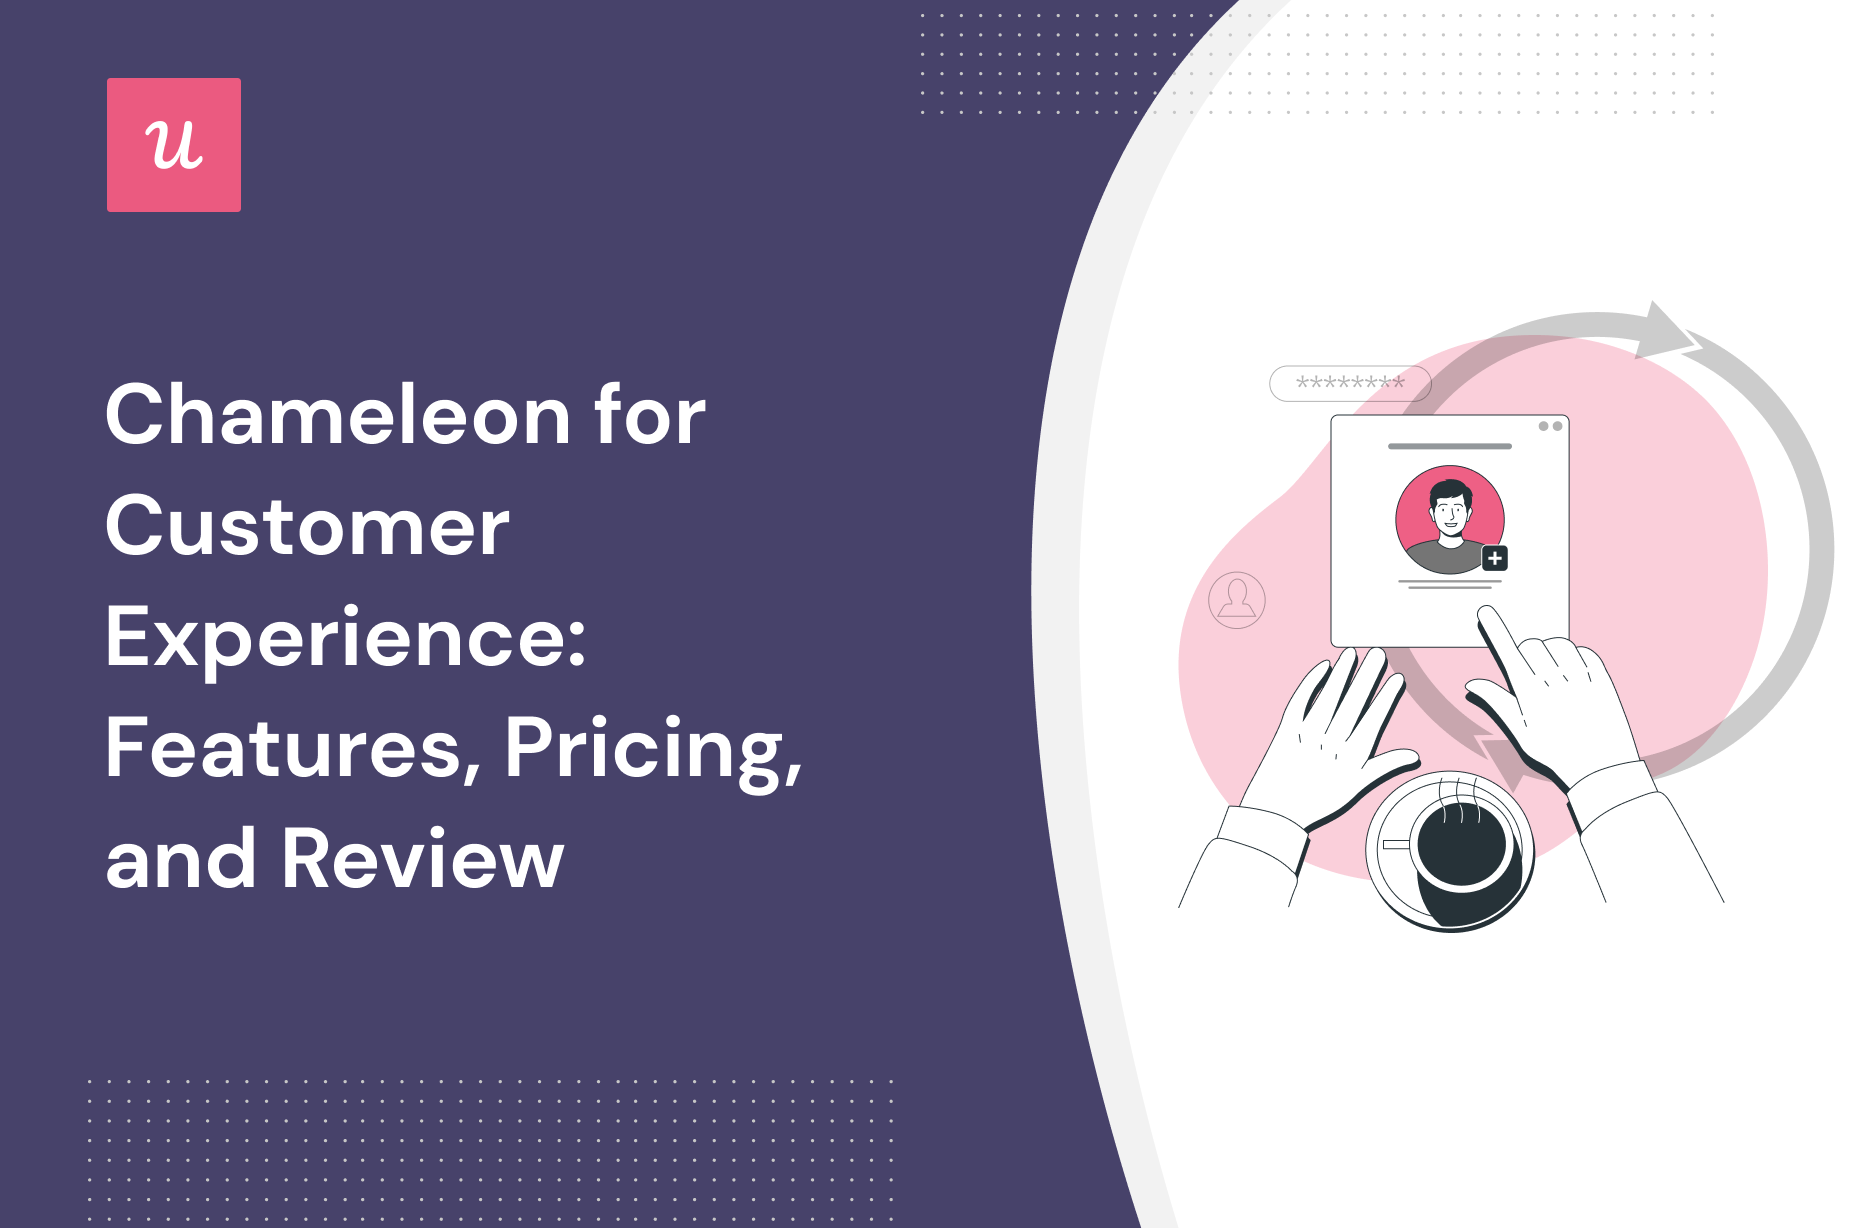 Chameleon for Customer Experience: Features, Pricing, and Review